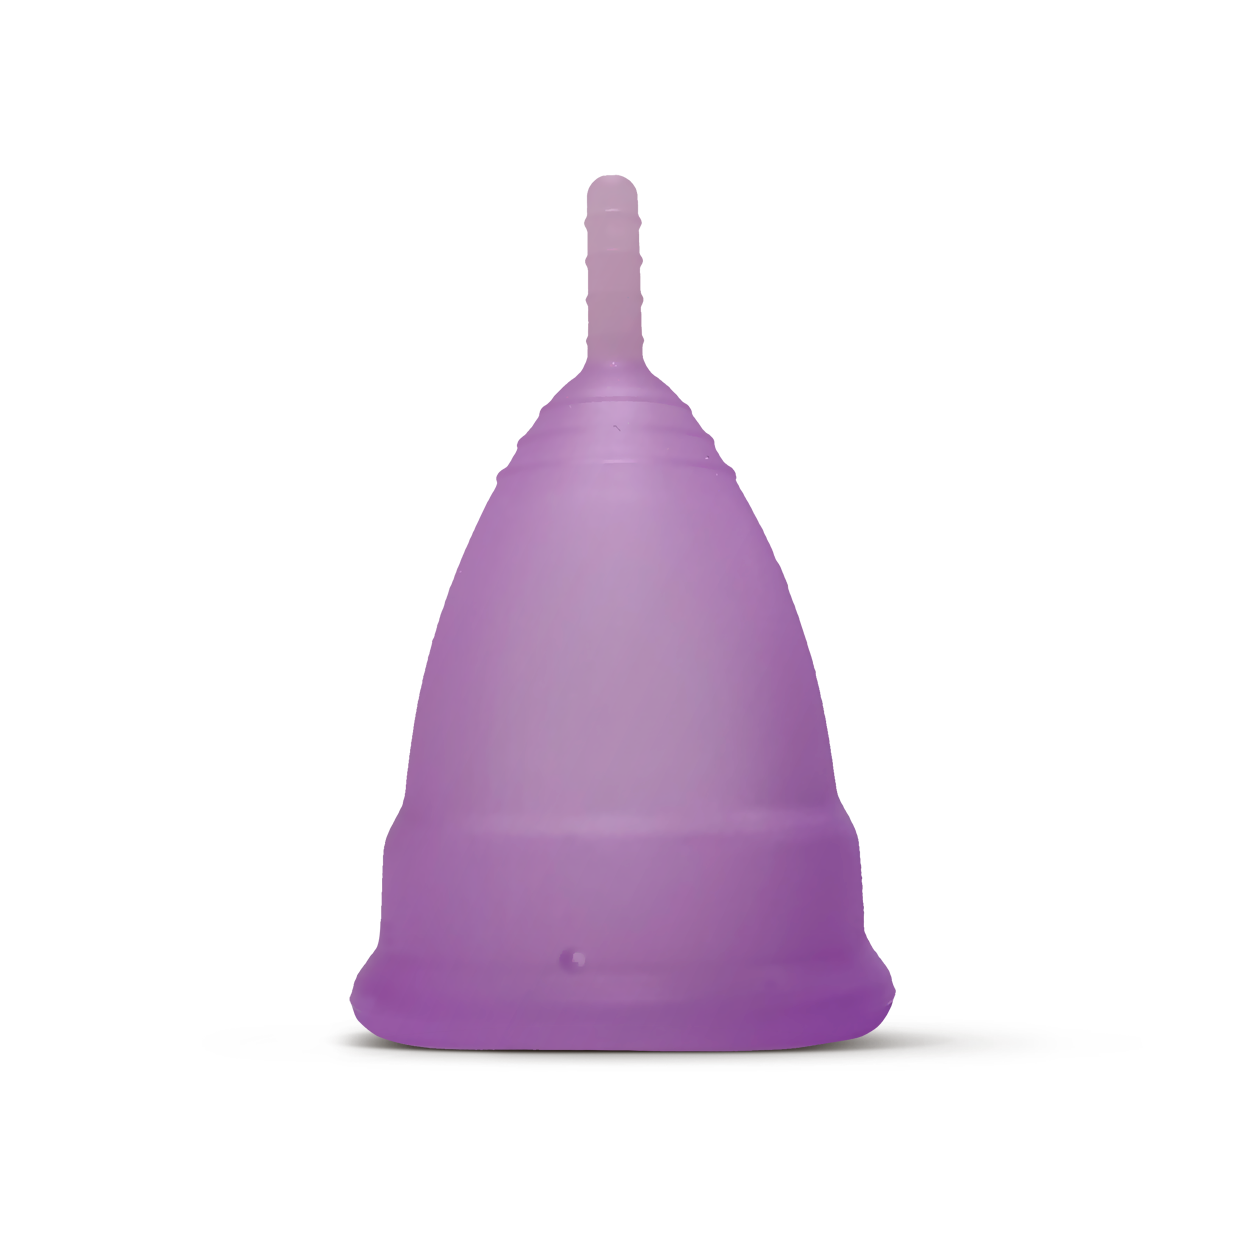 best menstrual cup for beginners